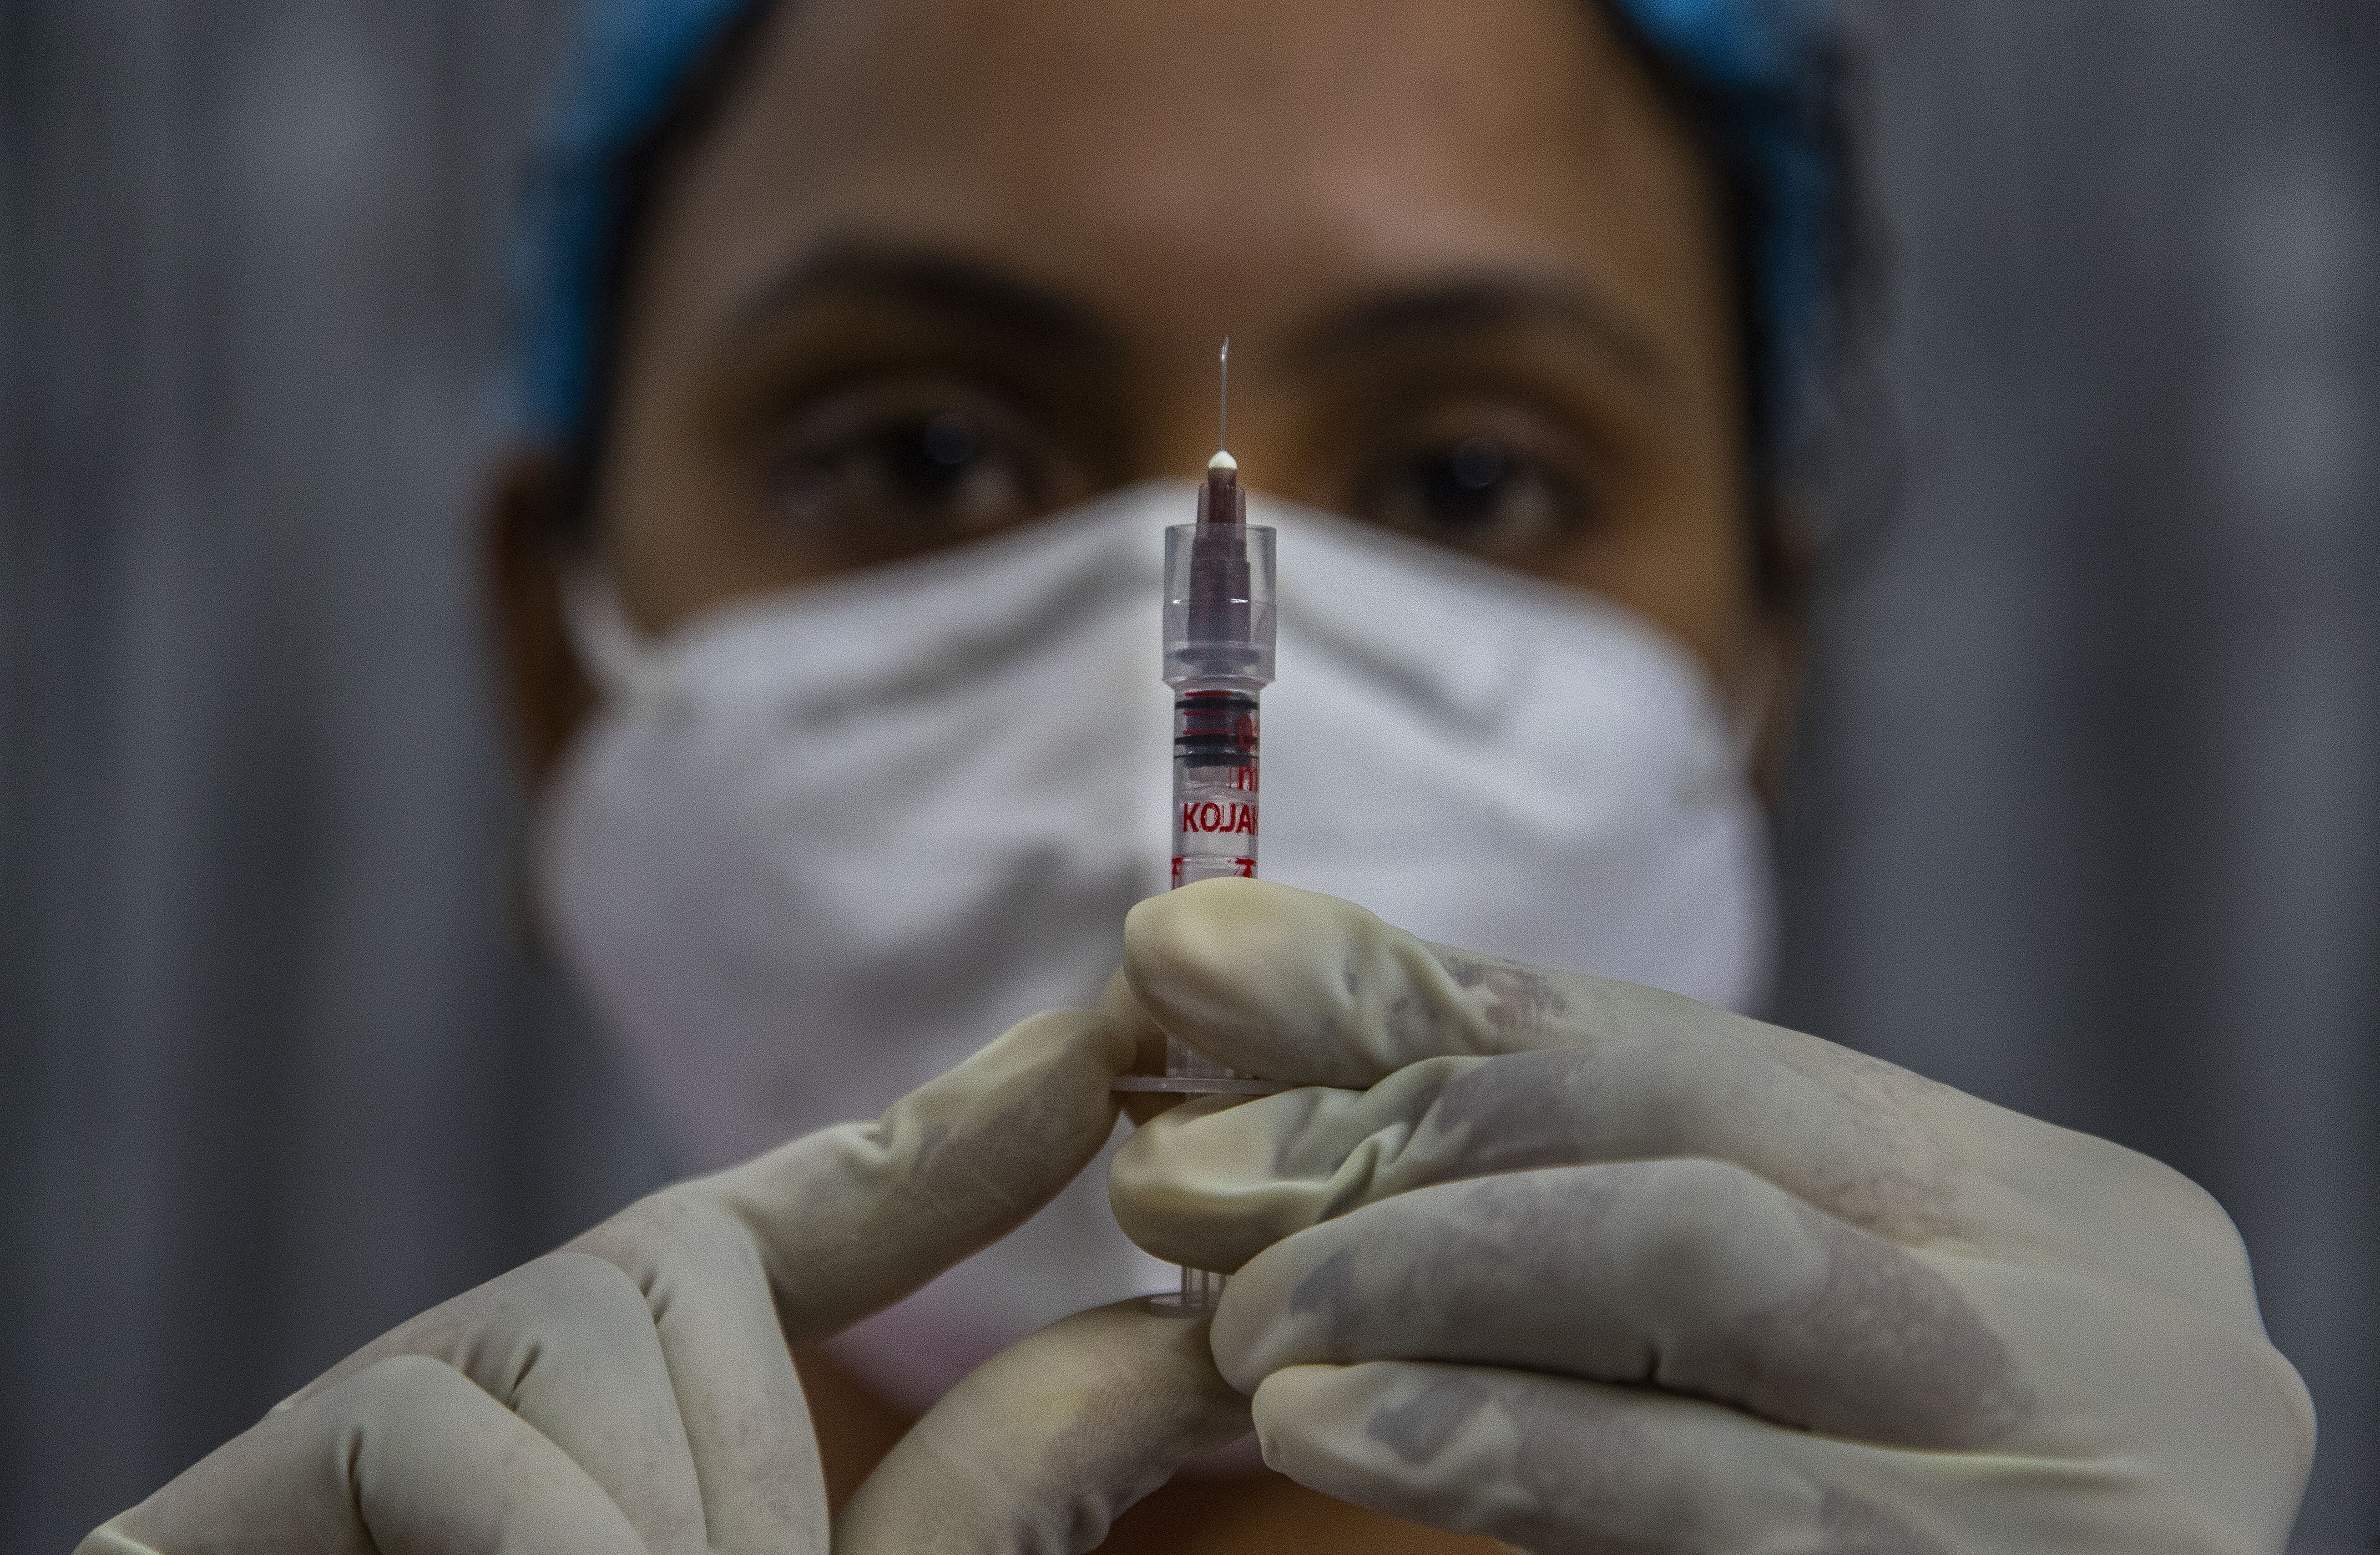 On January 3, India’s drug regulator authorised two vaccines for emergency use – Covishield and Covaxin, a home-grown vaccine by the Hyderabad-based giant Bharat Biotech which has not yet completed human trials. Photo: AP